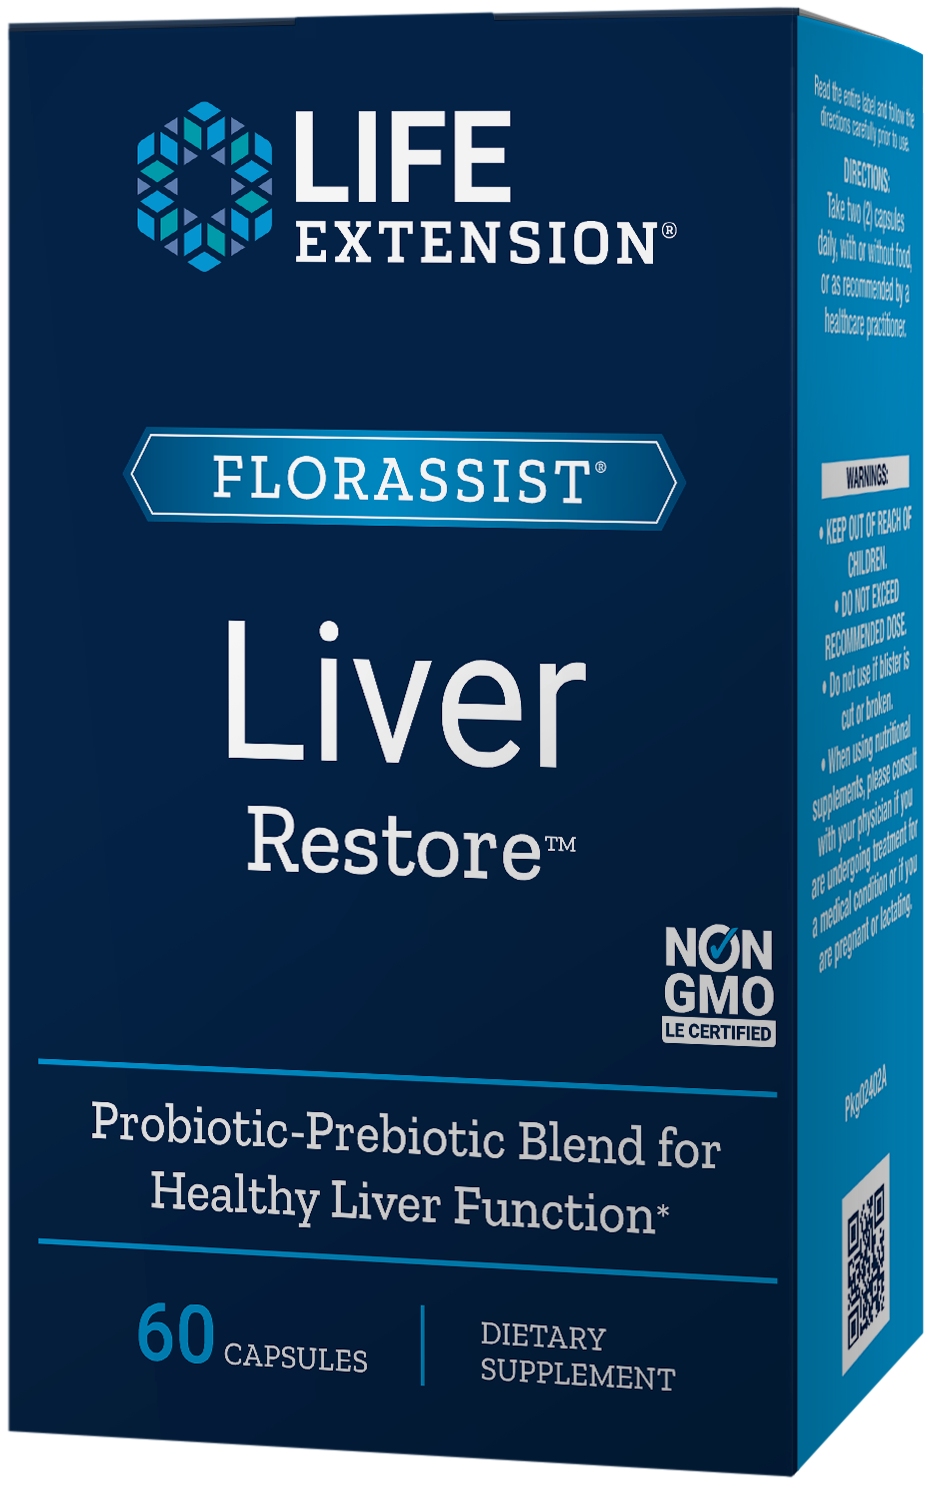 FLORASSIST® Liver Restore™ encourages liver health with clinically studied probiotics and a prebiotic.